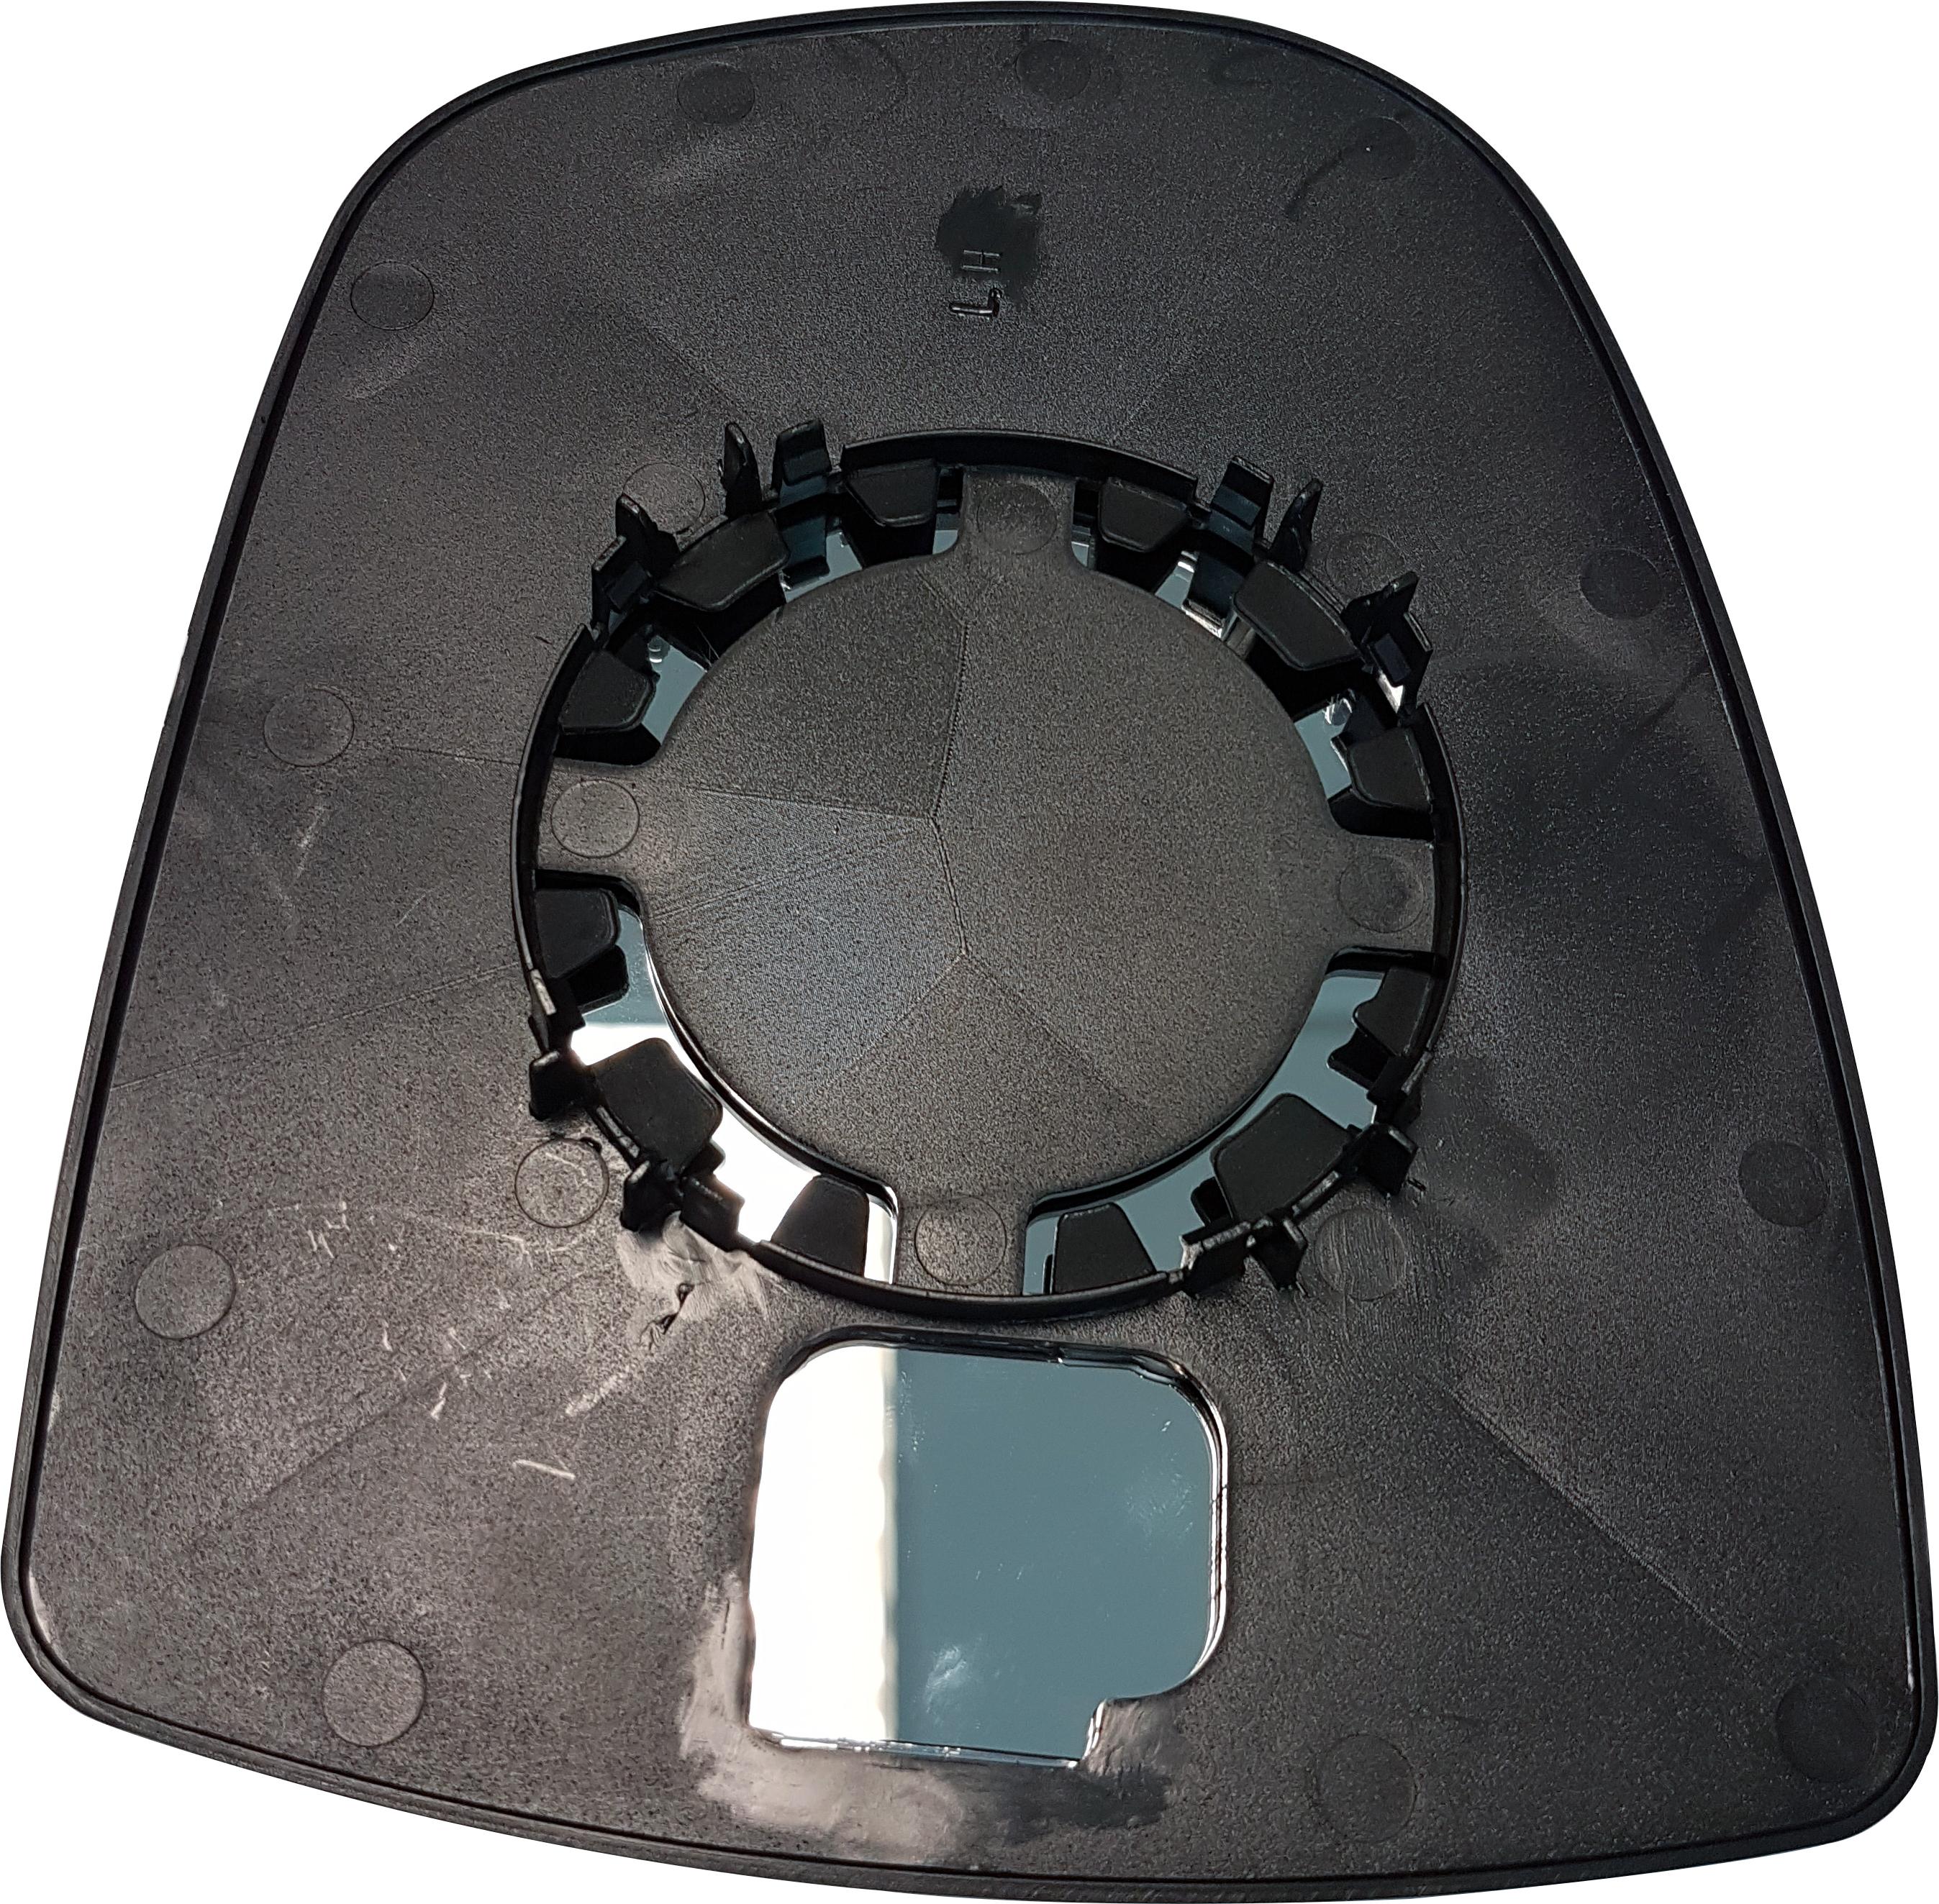 Summit Scg-07Lb Non-Heated Backing Plate